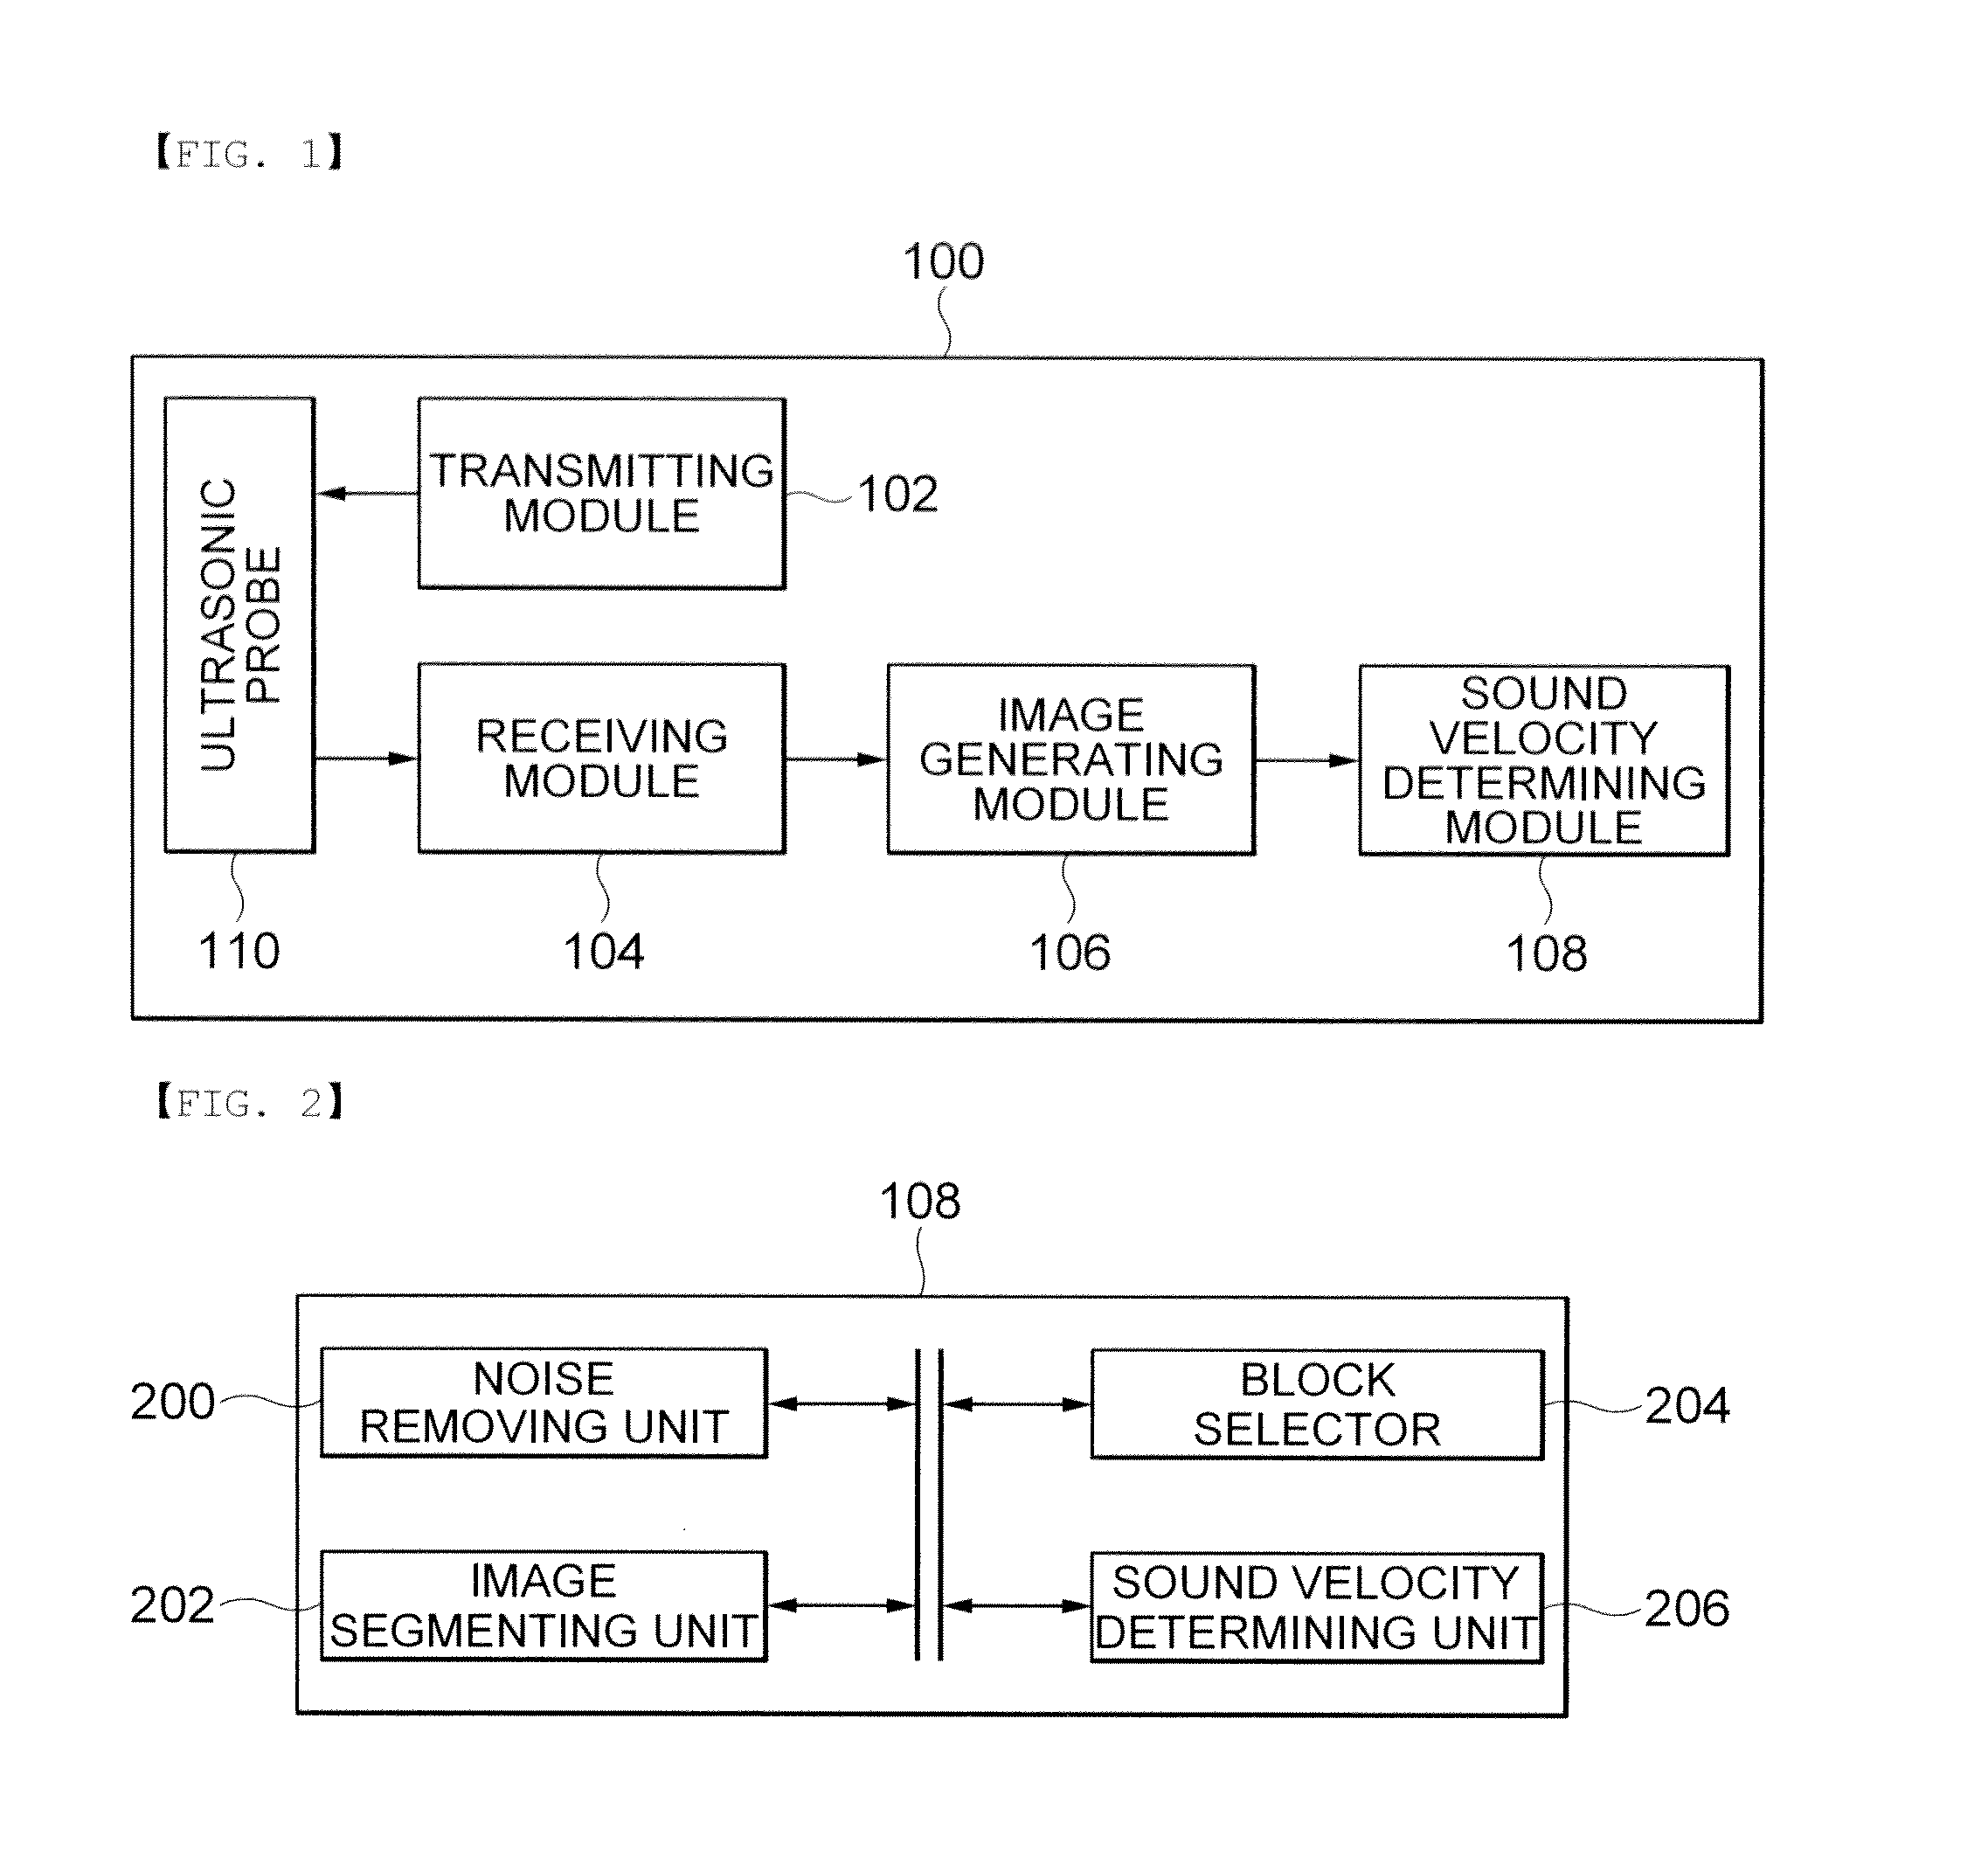 Apparatus and system for measuring velocity of ultrasound signal